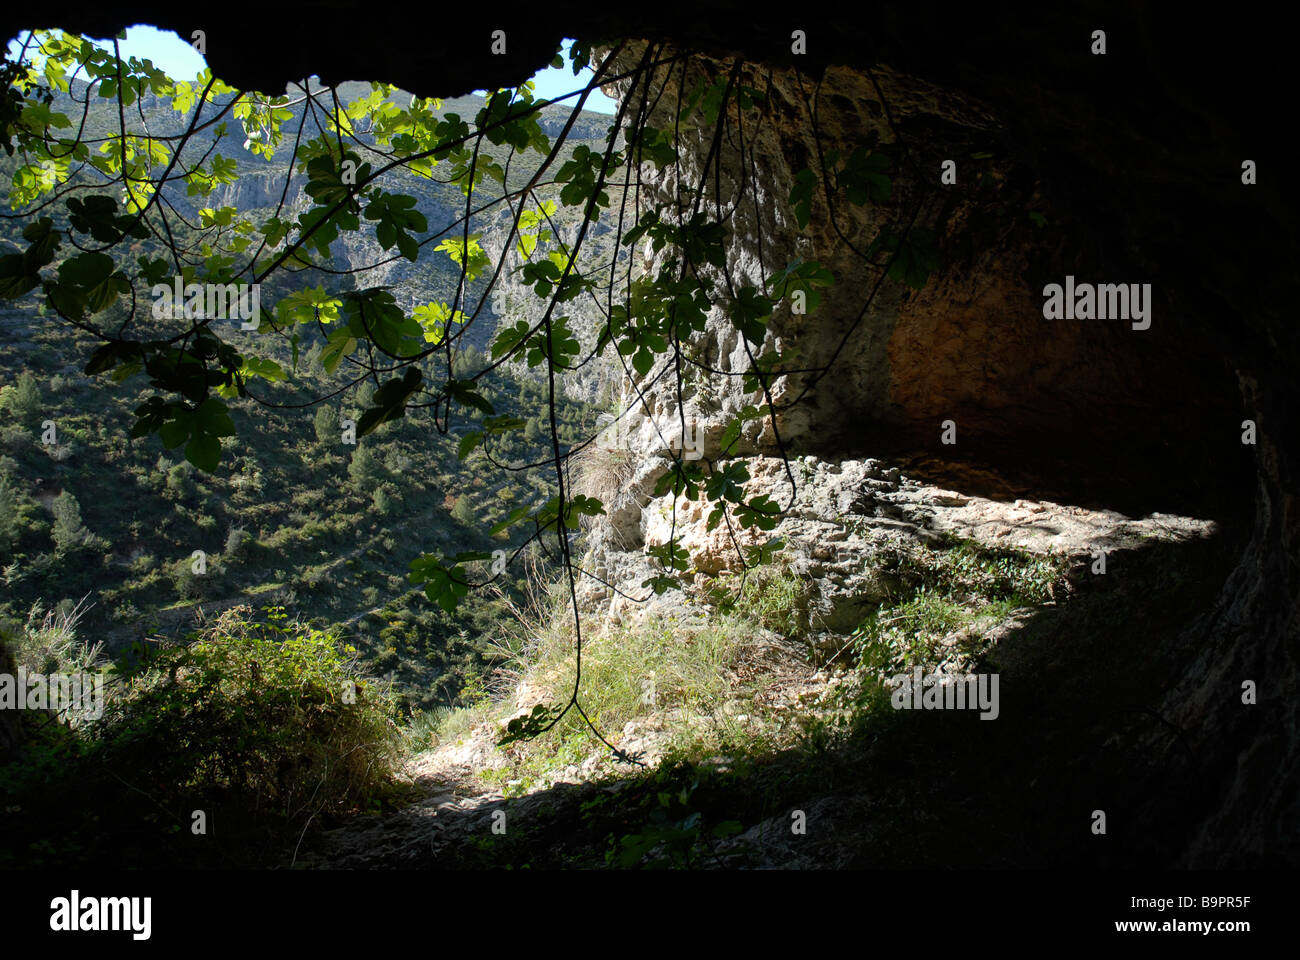 looking out of a cave, on a Mozarabic trail, Vall de Laguart, Benimaurell, Alicante Province, Comunidad Valenciana, Spain Stock Photo